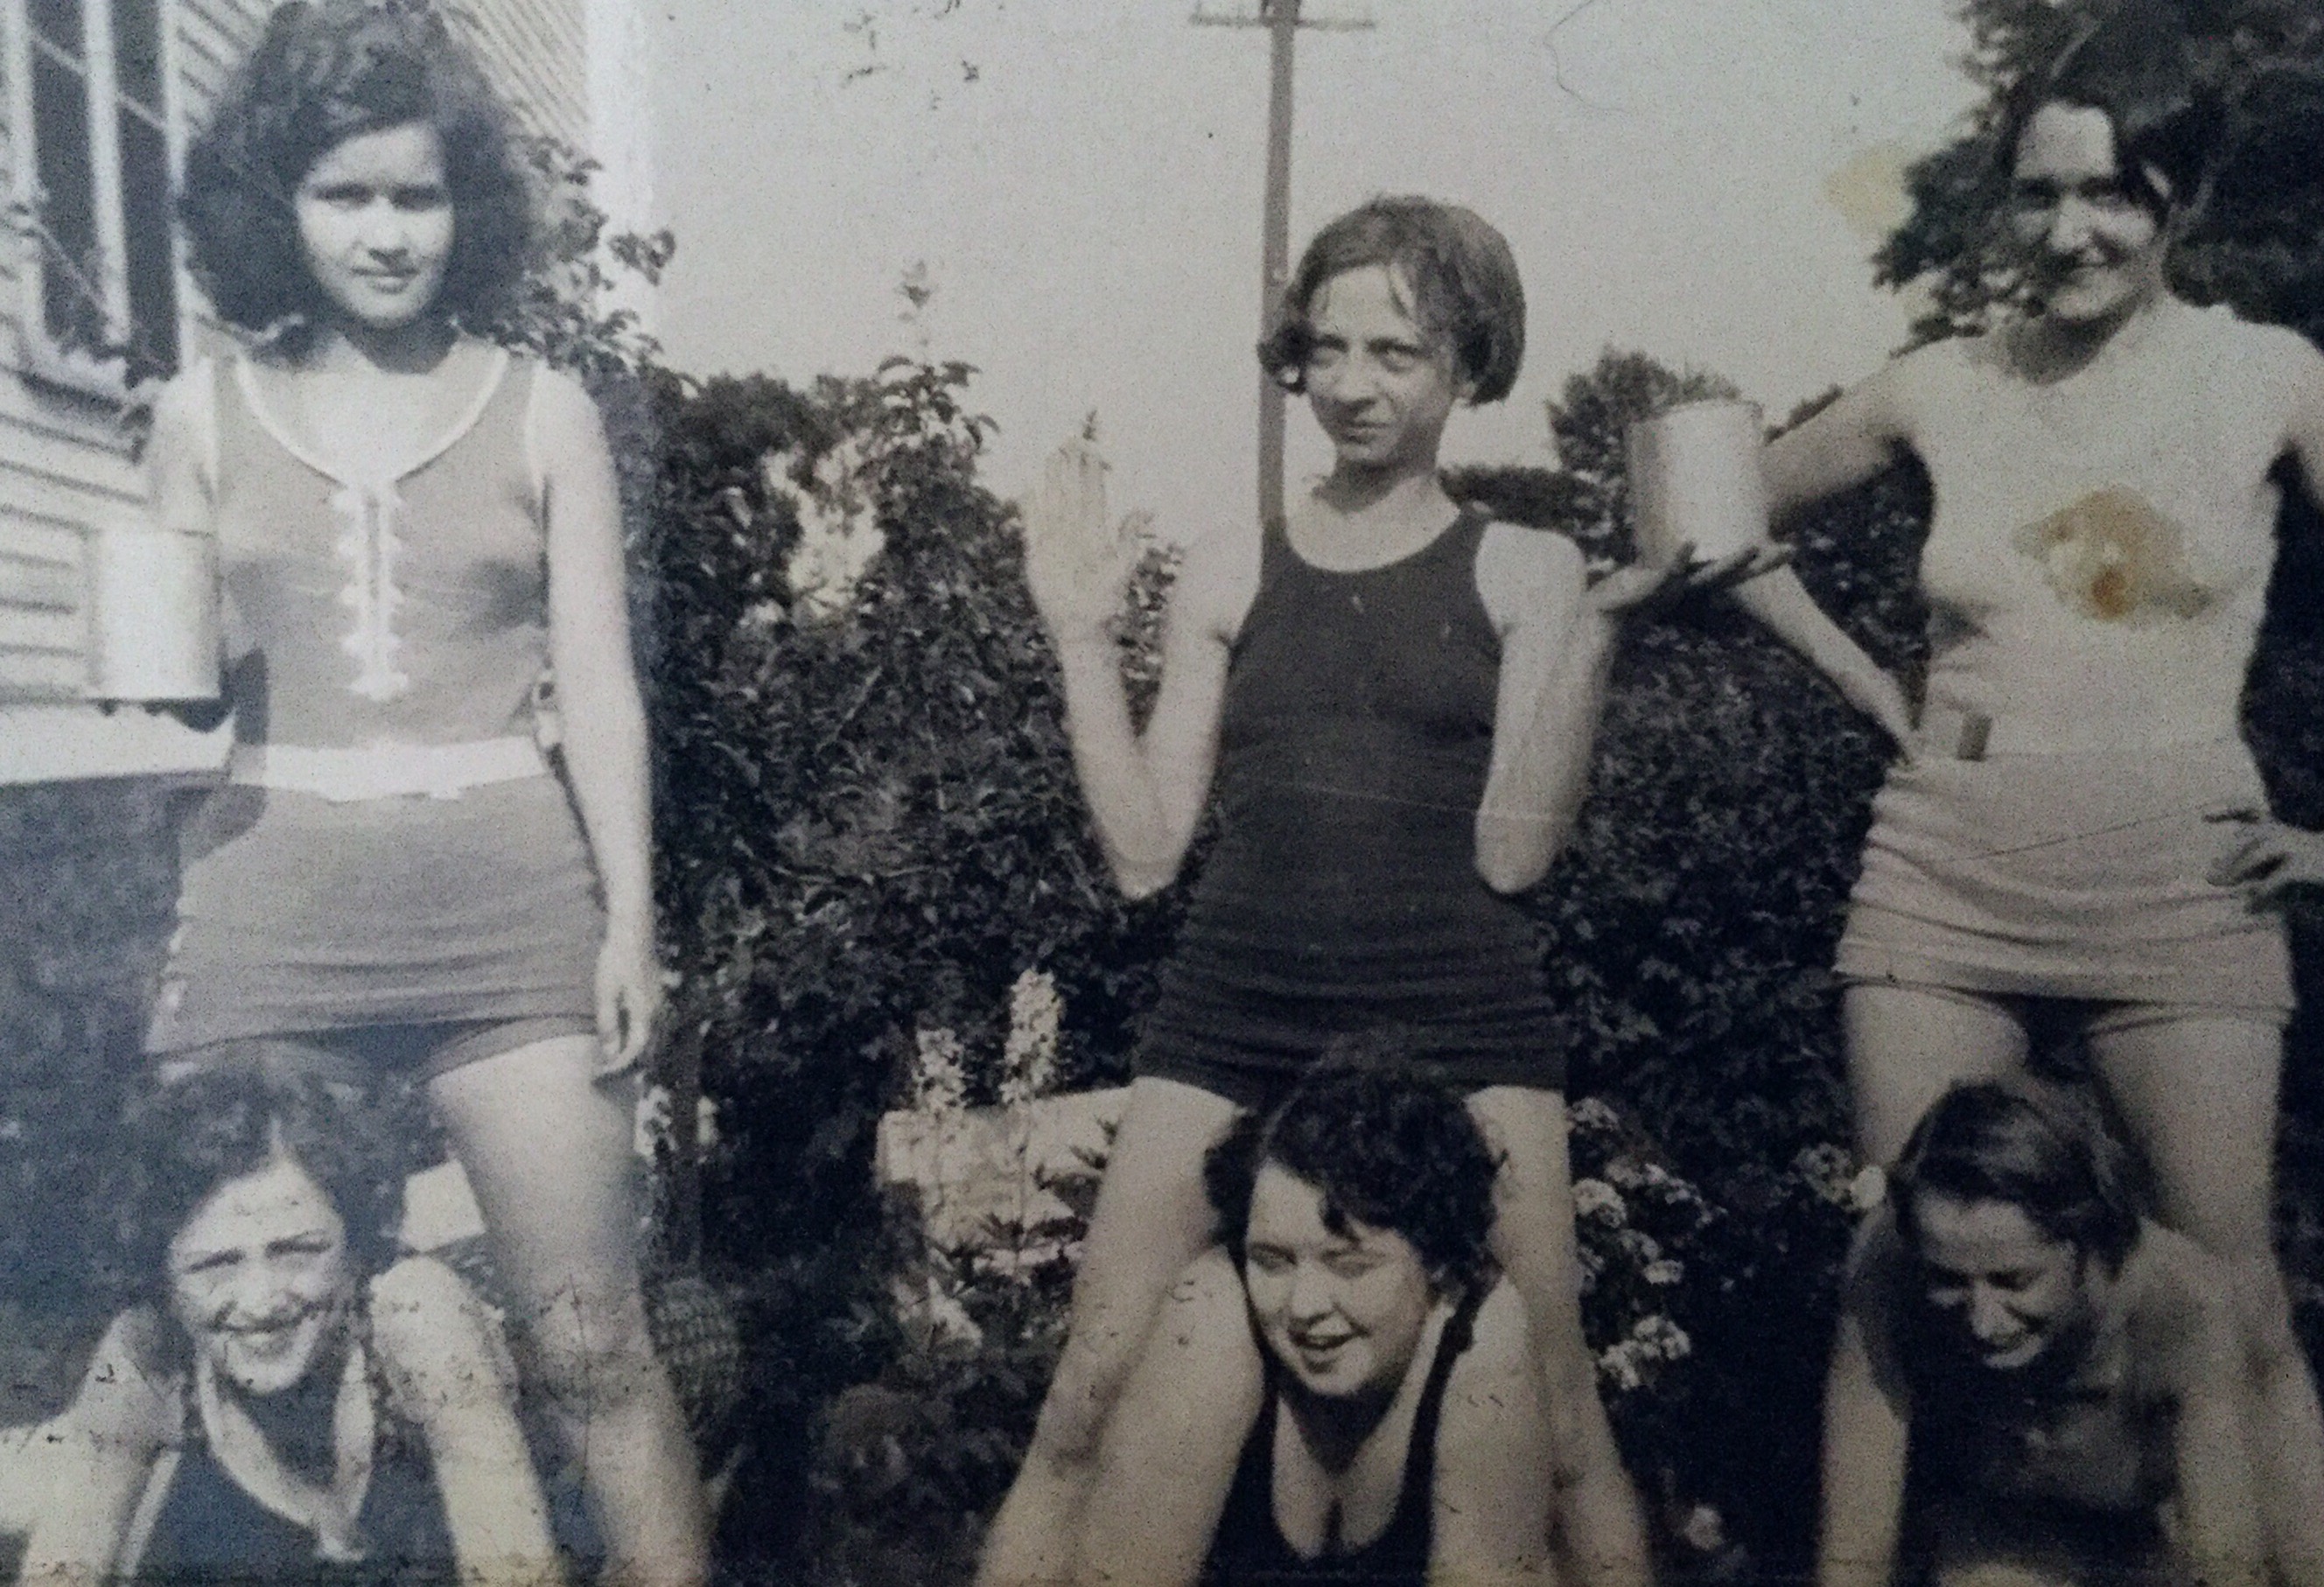 Girls having fun timeless maybe early 1920s 